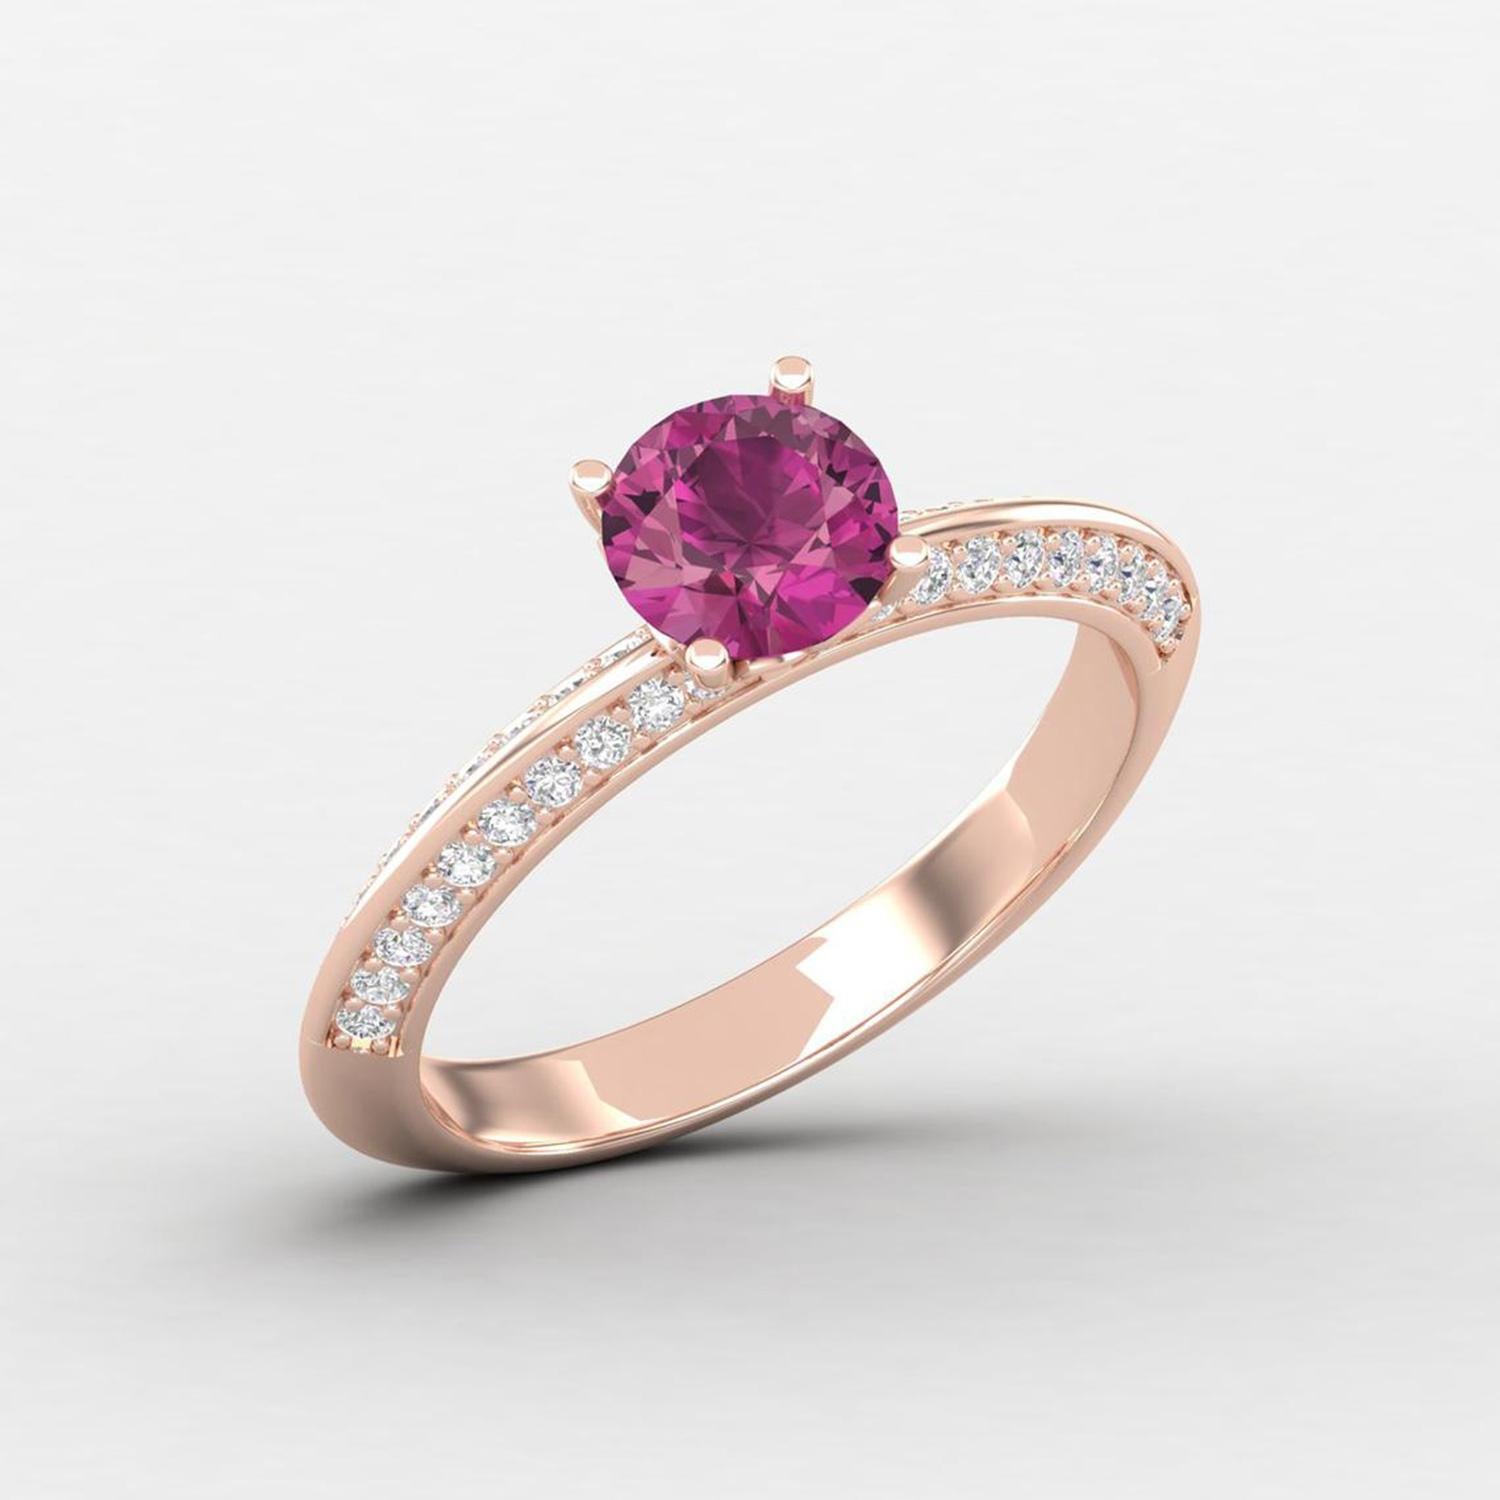 Modern 14 K Gold Pink Rubellite Tourmaline Ring / Diamond Solitaire Ring / Ring for Her For Sale